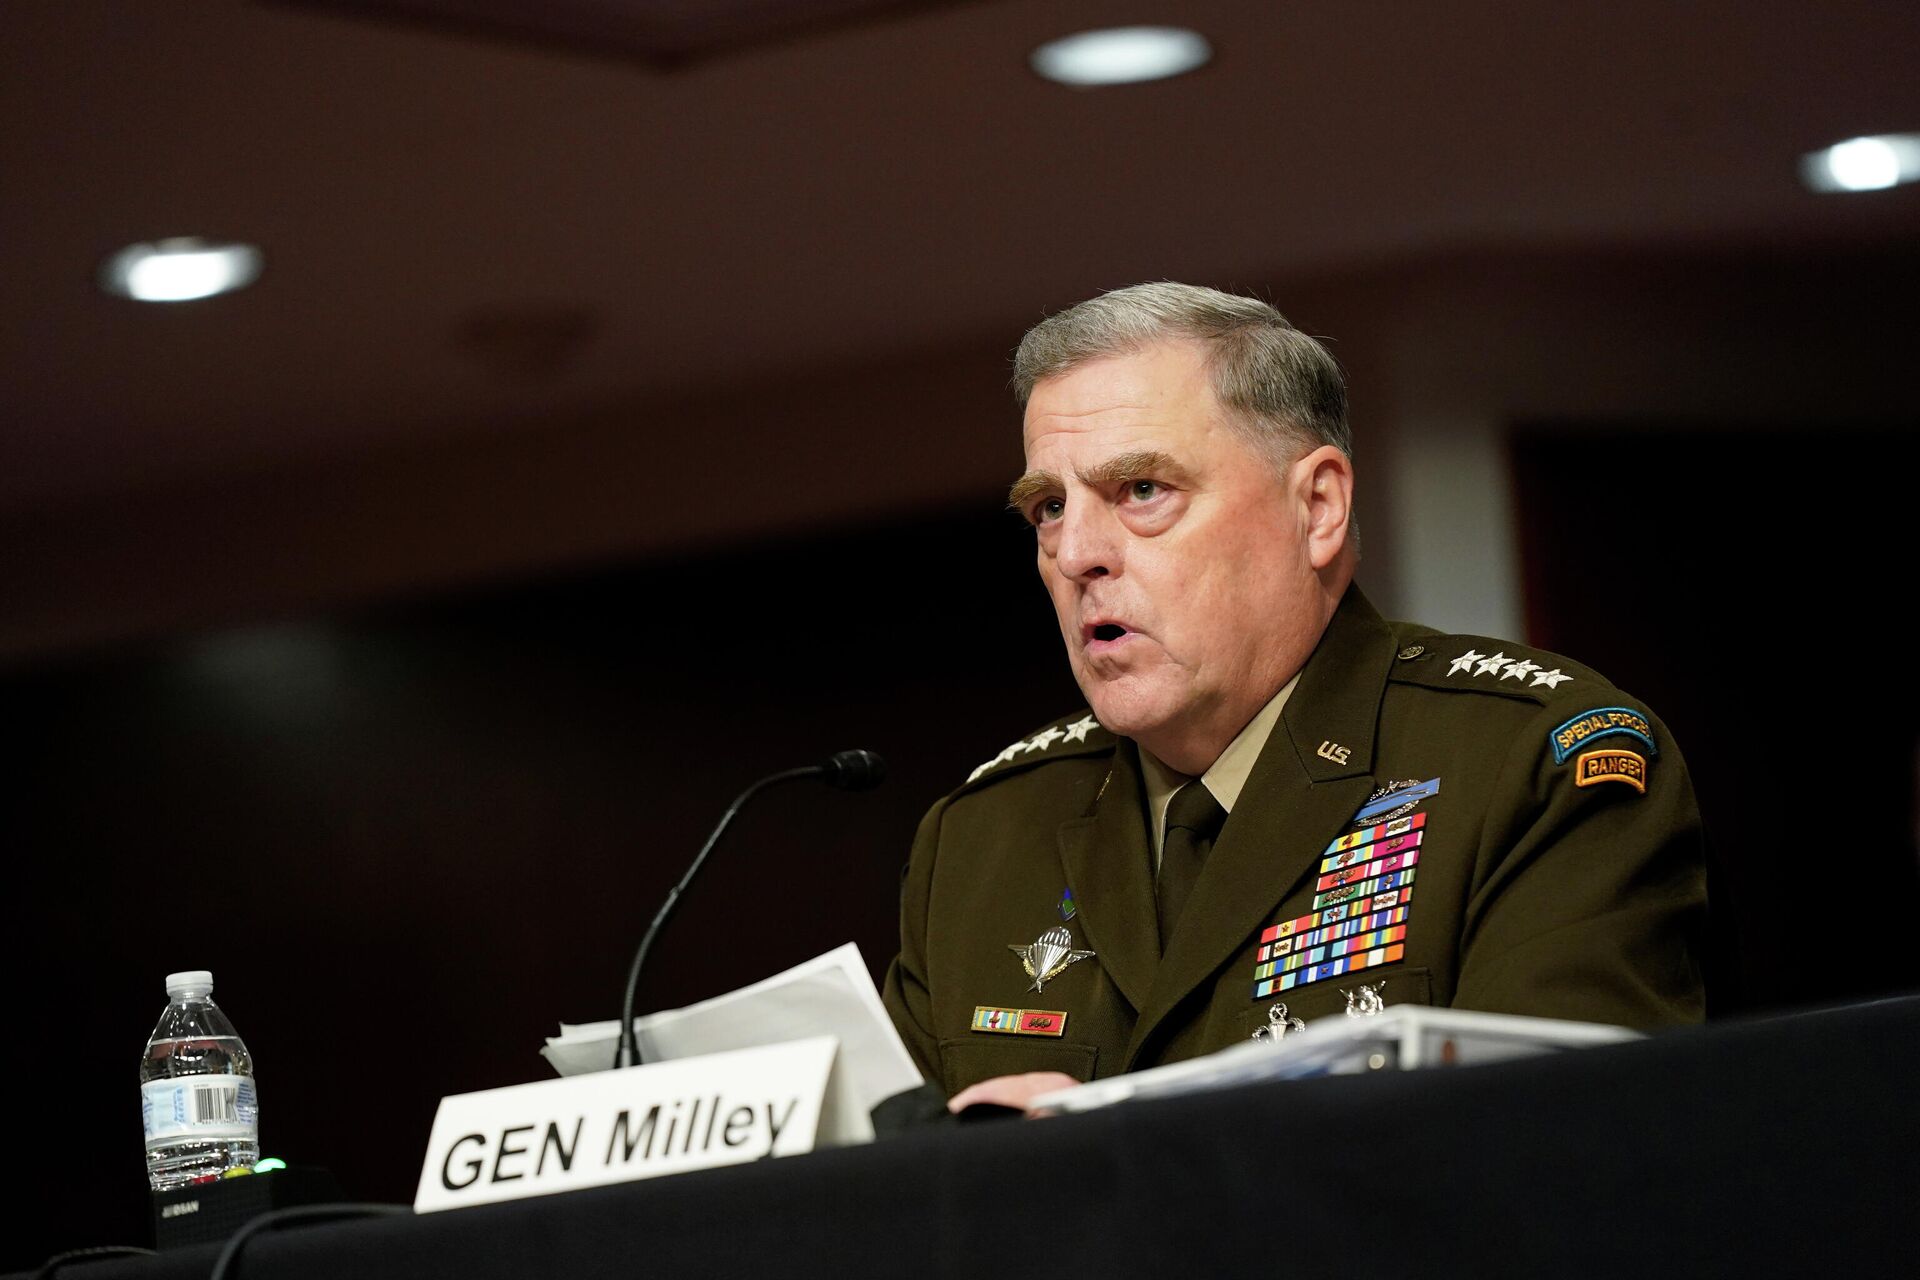 Chairman of the Joint Chiefs of Staff General Mark Milley speaks during a Senate Armed Services Committee hearing on the conclusion of military operations in Afghanistan and plans for future counterterrorism operations, on Capitol Hill in Washington, U.S., September 28, 2021. - Sputnik International, 1920, 28.09.2021